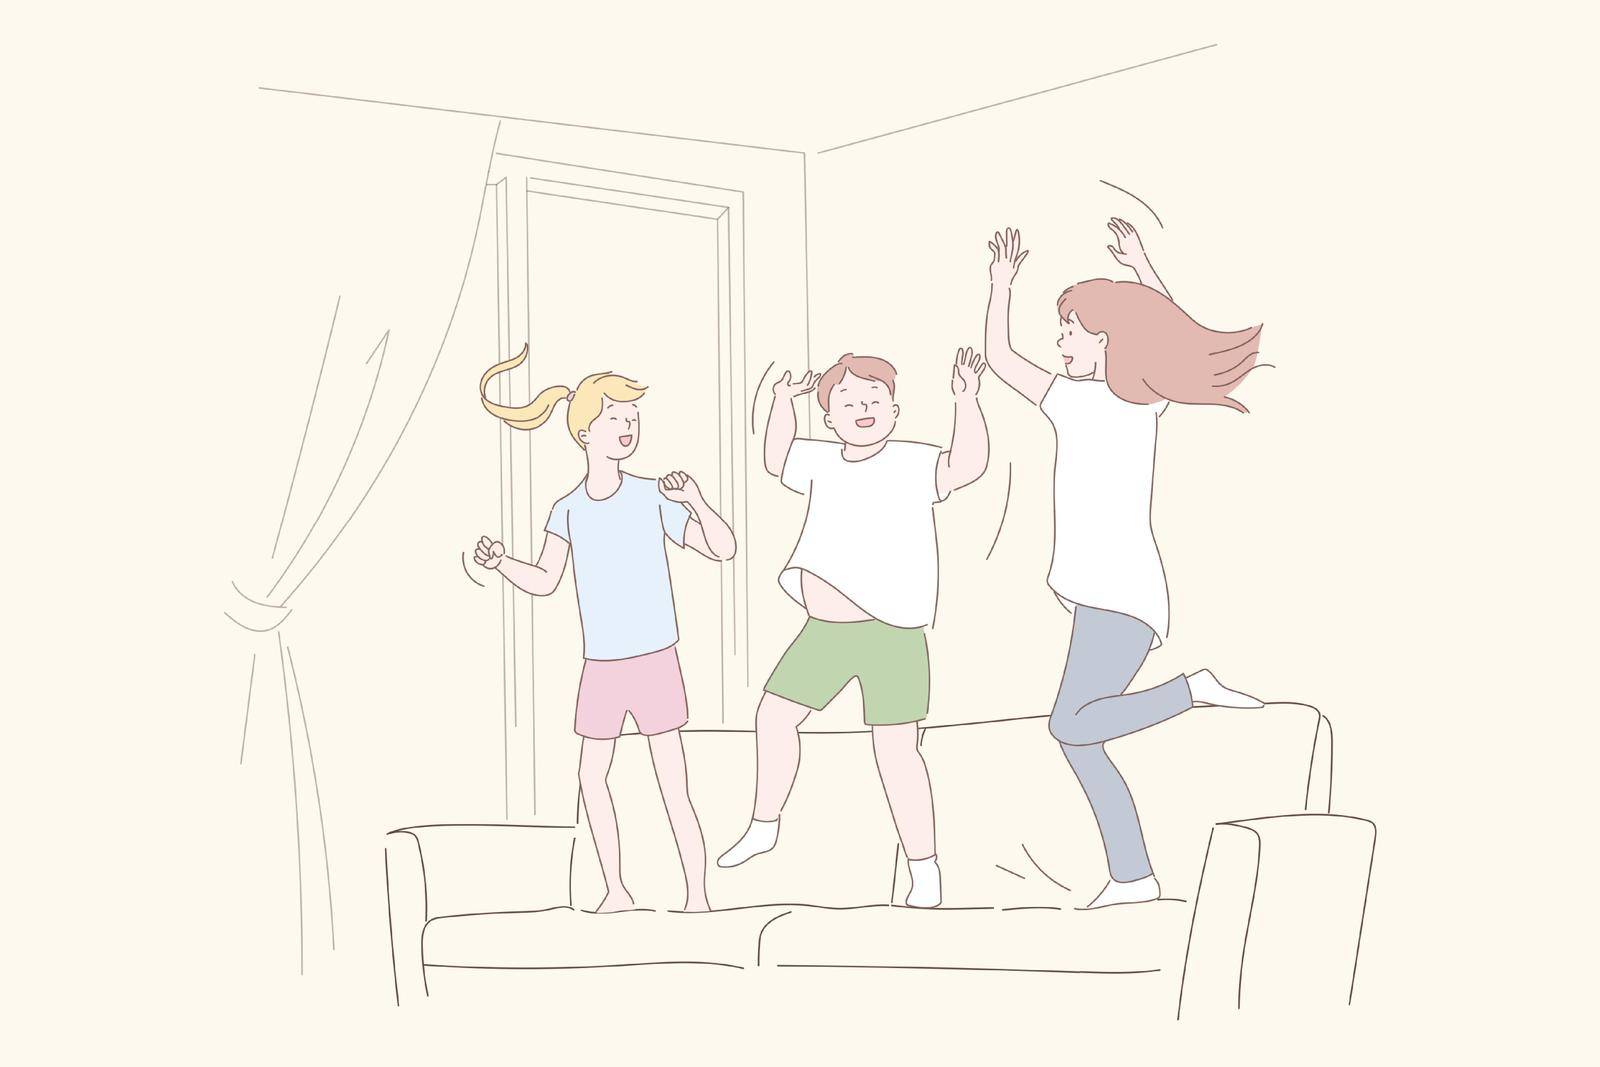 Home leisure, recreation, positive emotion, joyfulness concept. Entertainment, fun game, activity, sisters and brother, capering kids, children jumping on couch. Simple flat vector